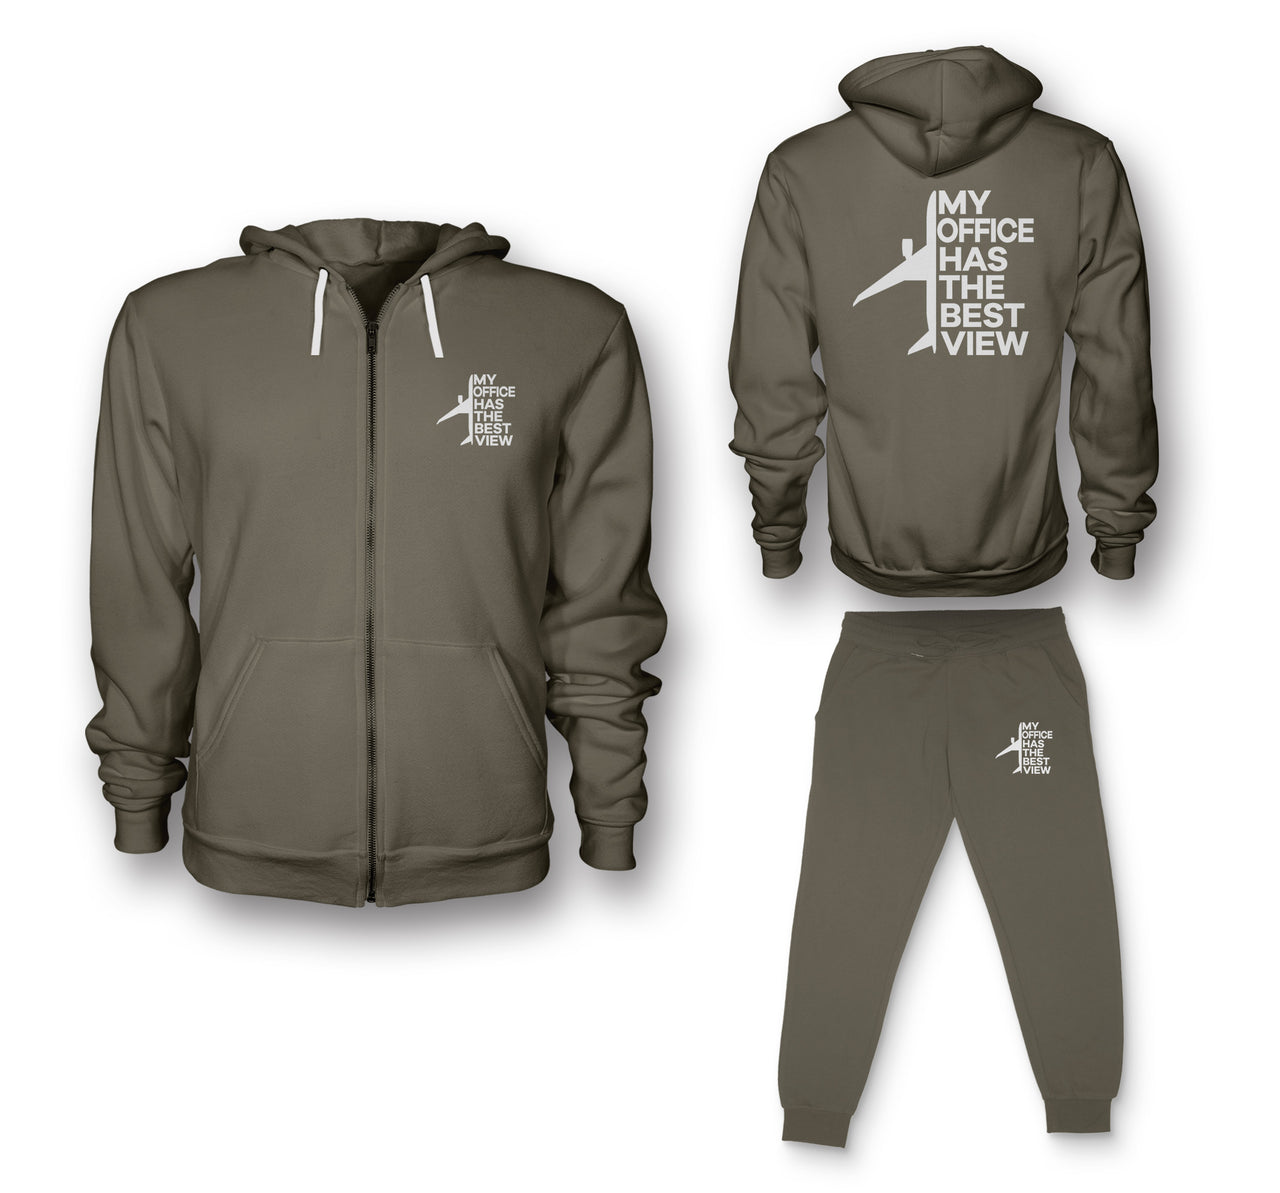 My Office Has The Best View Designed Zipped Hoodies & Sweatpants Set